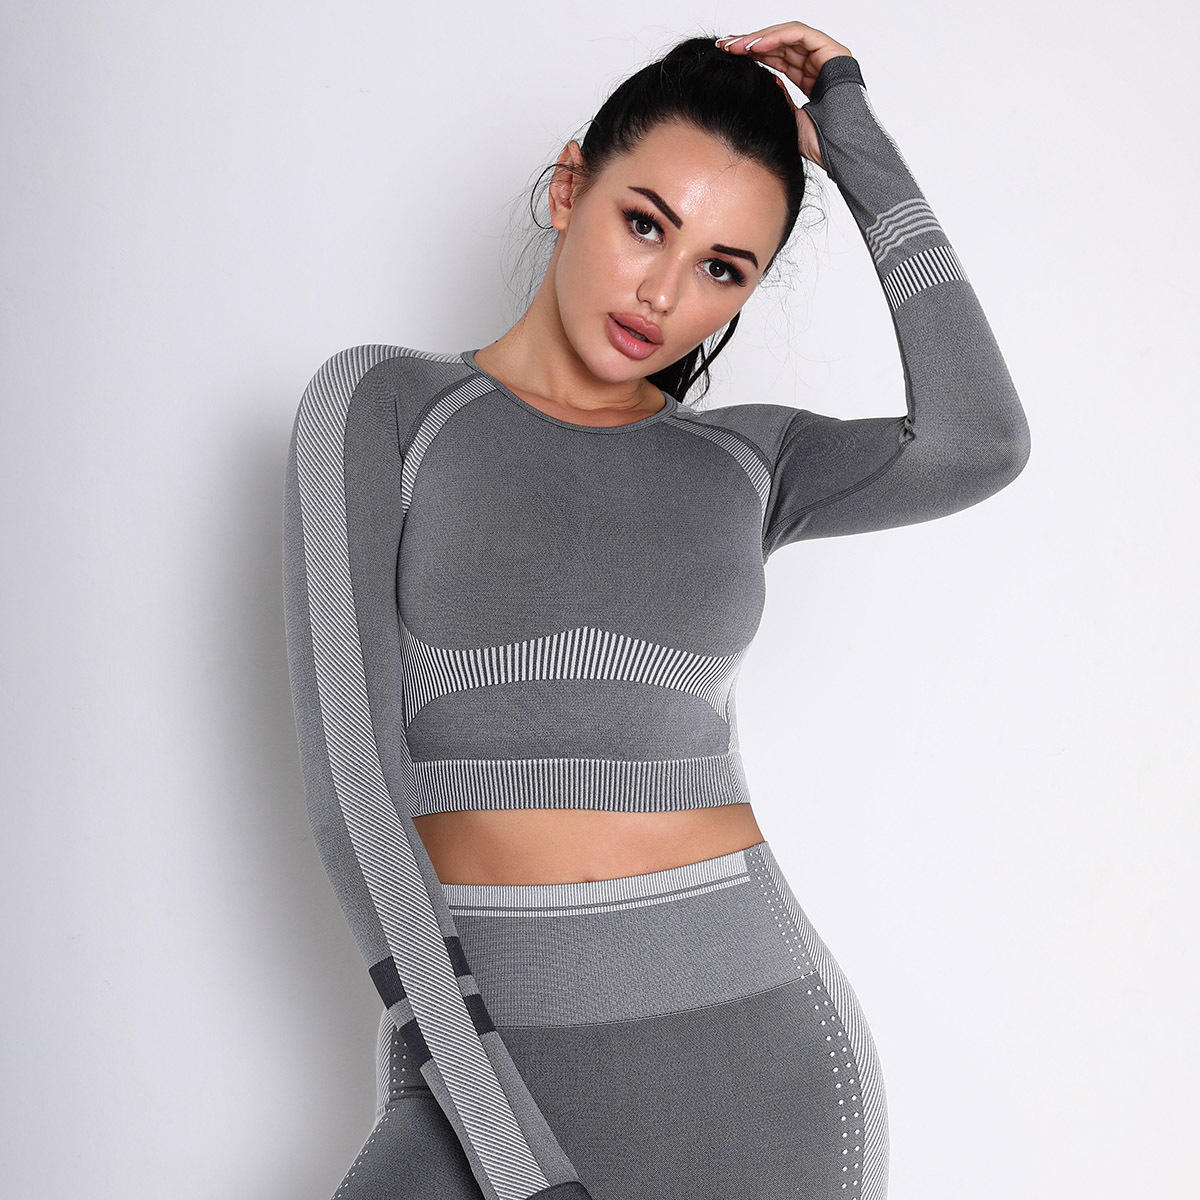 Wholesale Seamless Sportswear Cropped Tops Gym Fitness Wear Workout Girls Sexy Long Sleeve Tops Shirt